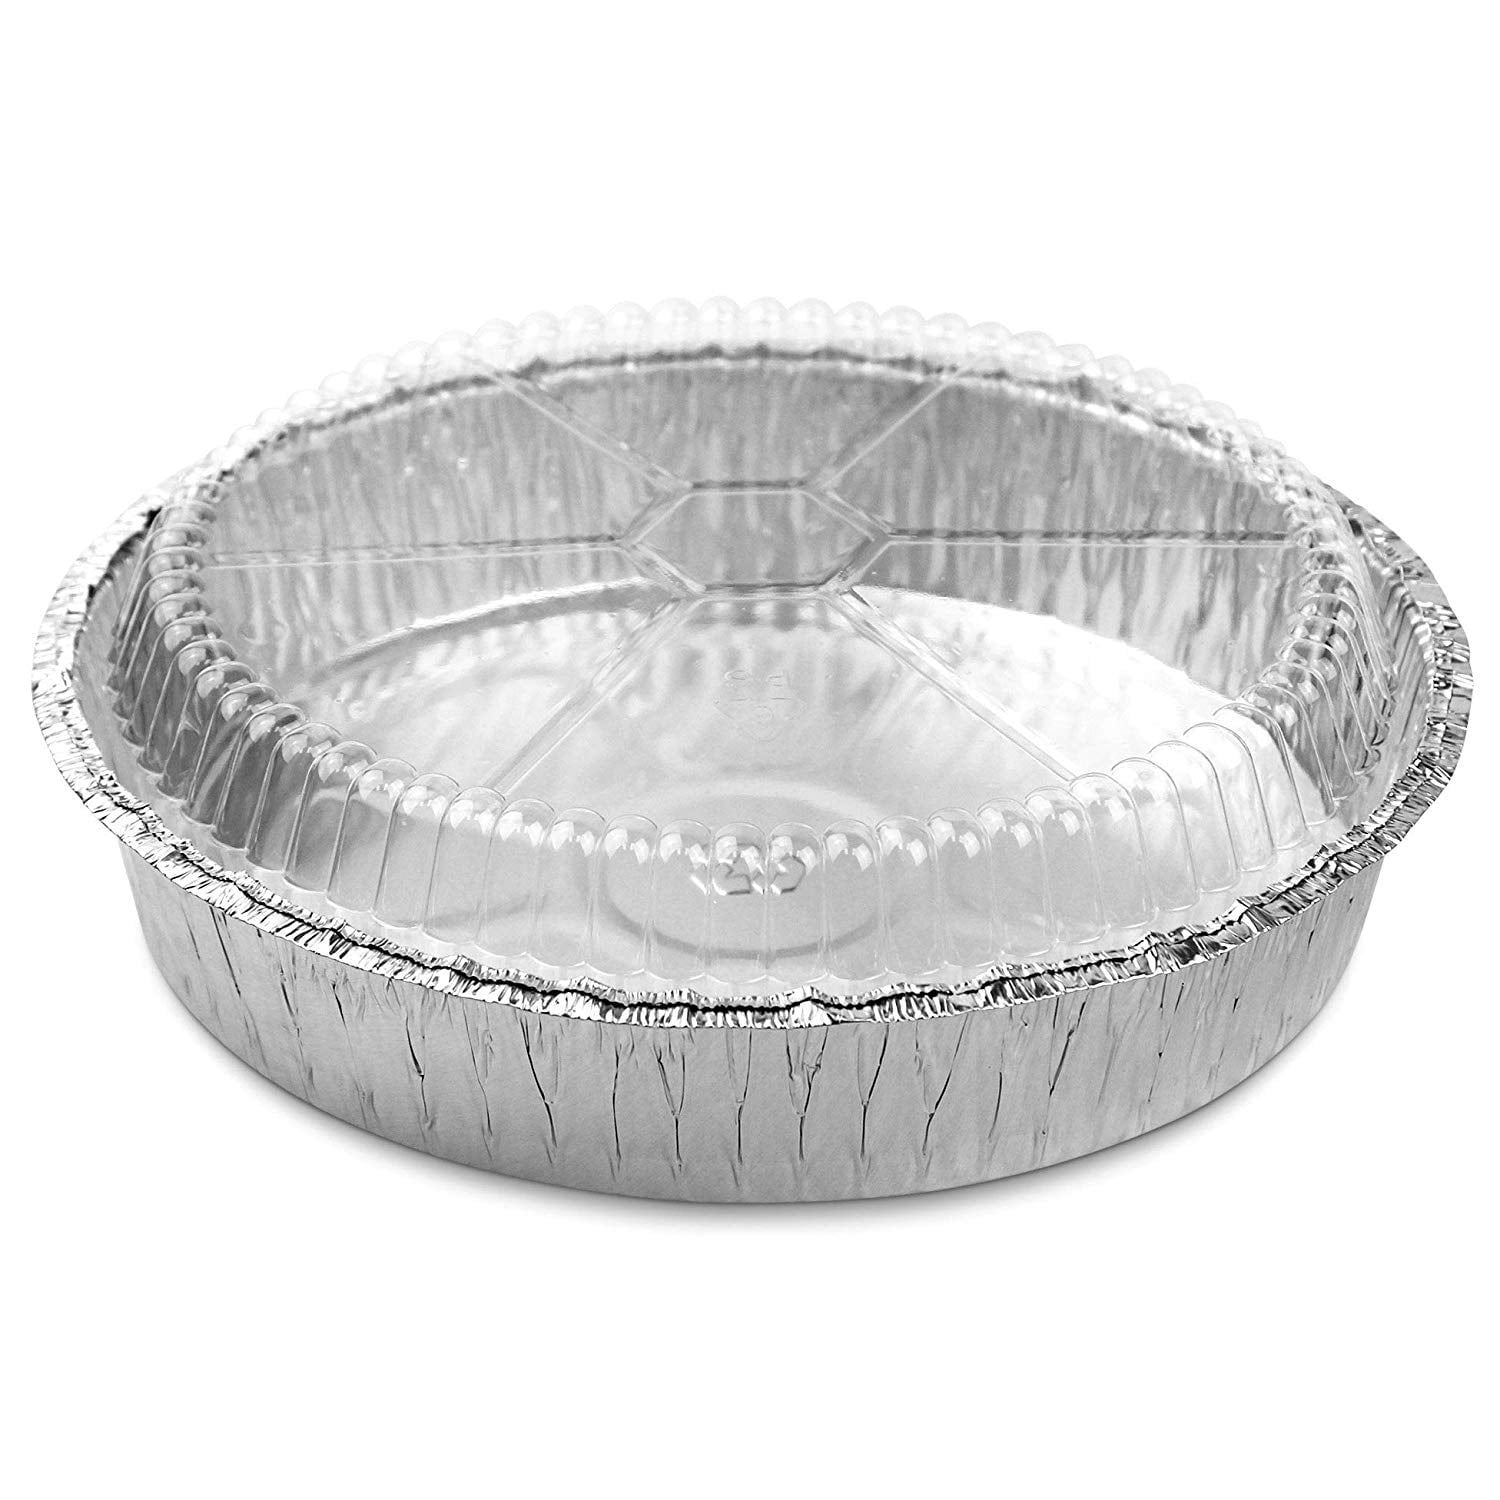 Premium 7-Inch Round Foil Pans with Plastic Dome Lids l Heavy Duty l Disposable Aluminum Tin for Roasting 360 Pack or Cooking Baking